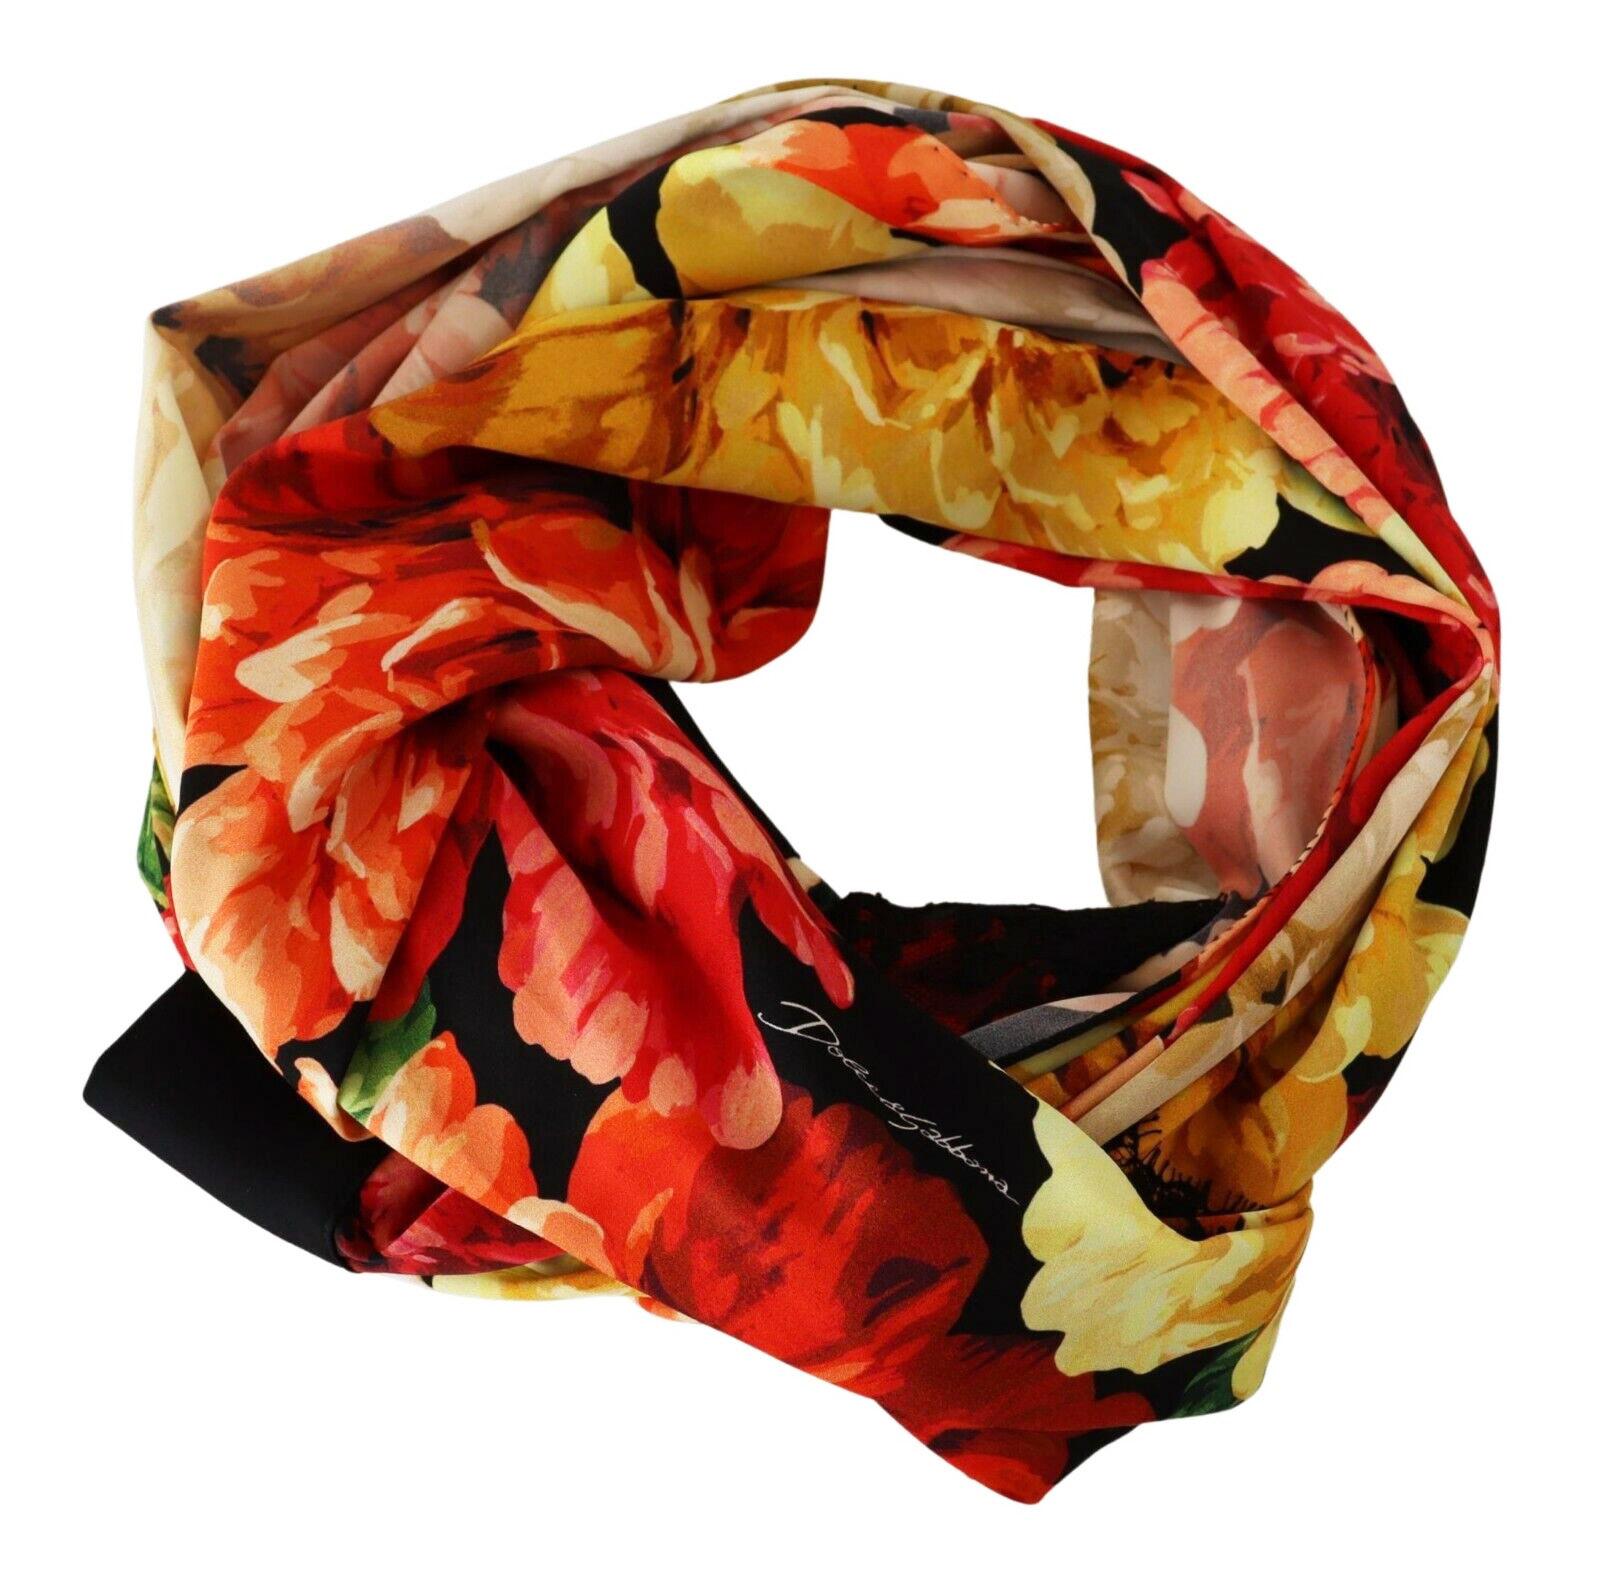 Gorgeous brand new with tags, 100% Authentic Dolce & Gabbana women scarf with floral print crafted from silk blend.

Gender: Women
Color: Black with multicolor floral print
Material: 83% Silk 7% Cotton 7% Elastane 3% Nylon

Logo details
Made in